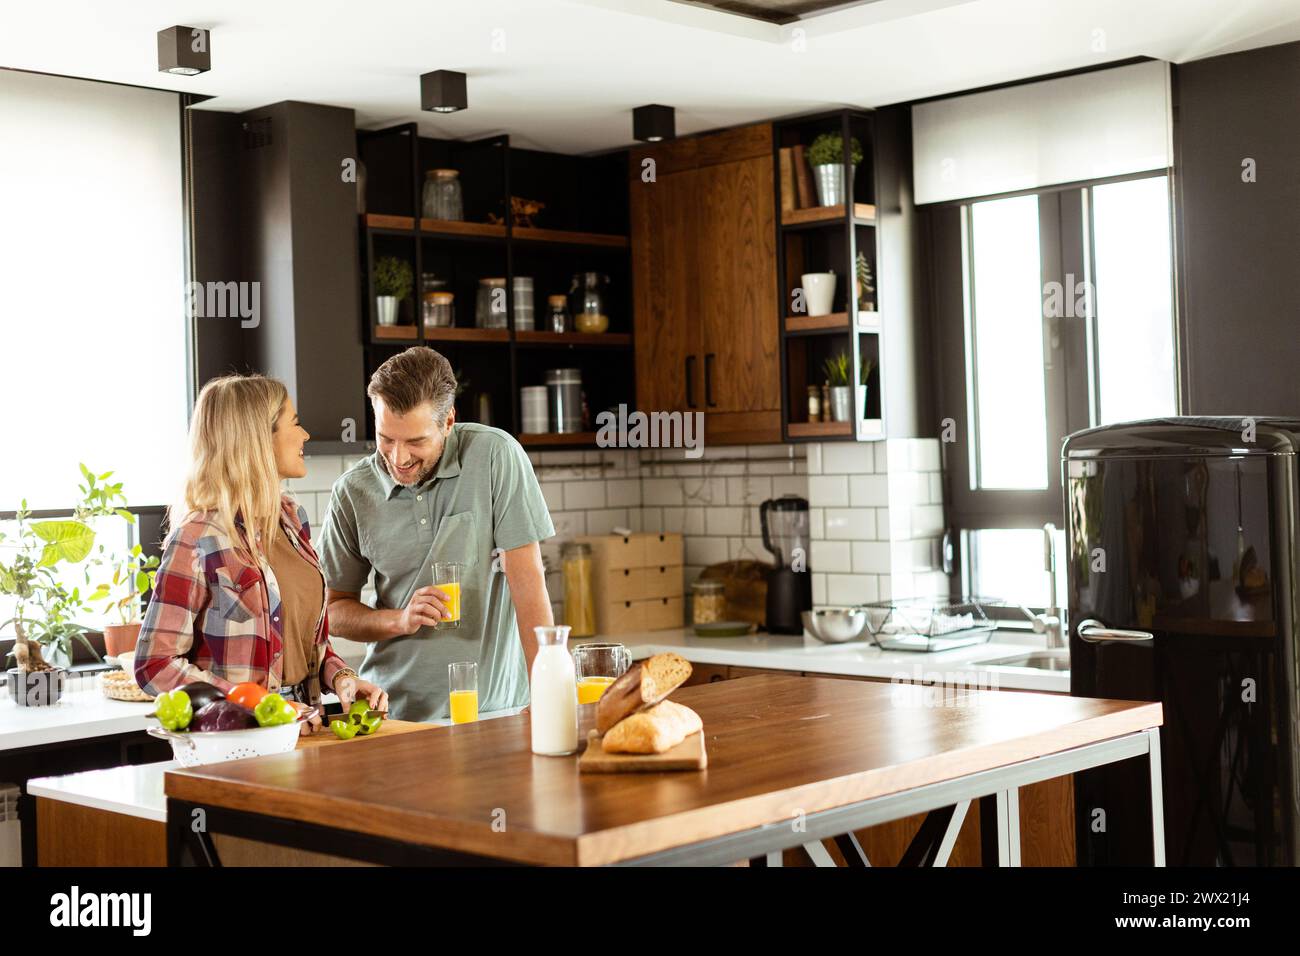 A pair enjoying a lighthearted conversation with fresh juice and a healthy breakfast spread on the counter. Stock Photo